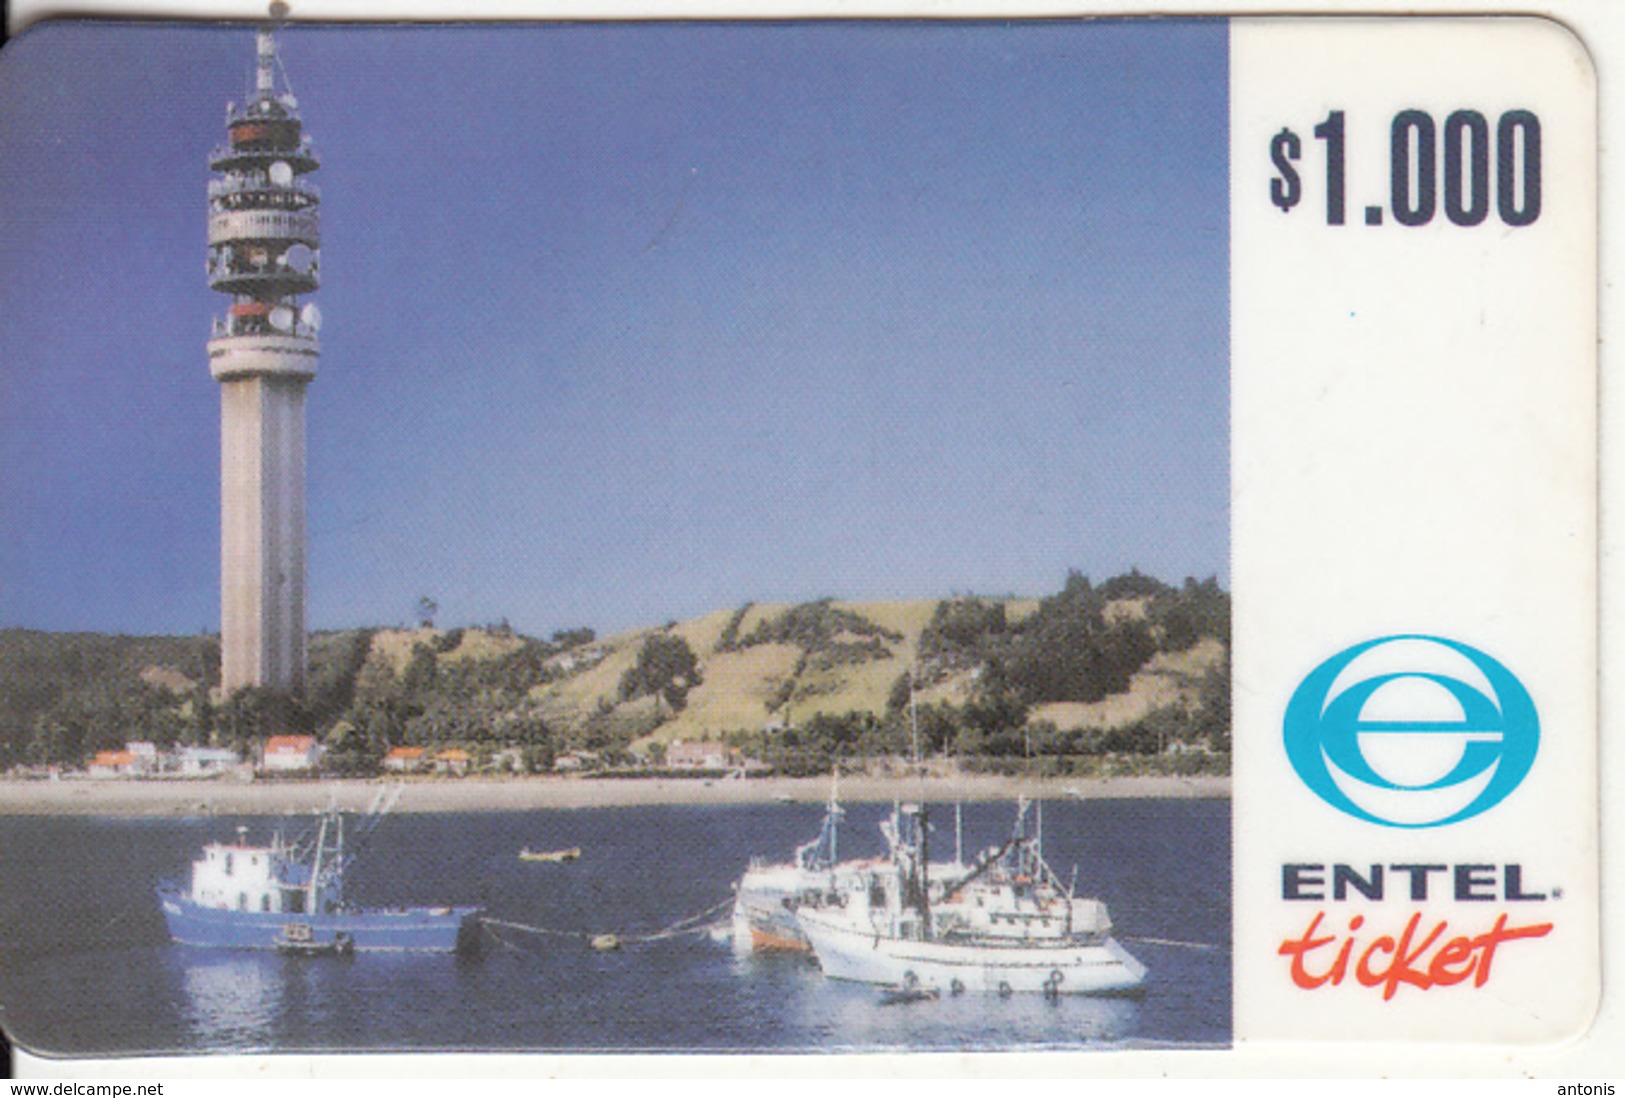 CHILE - Telecom Tower, ENTEL Prepaid Card $1000, Exp.date 30/11/99, Used - Chile